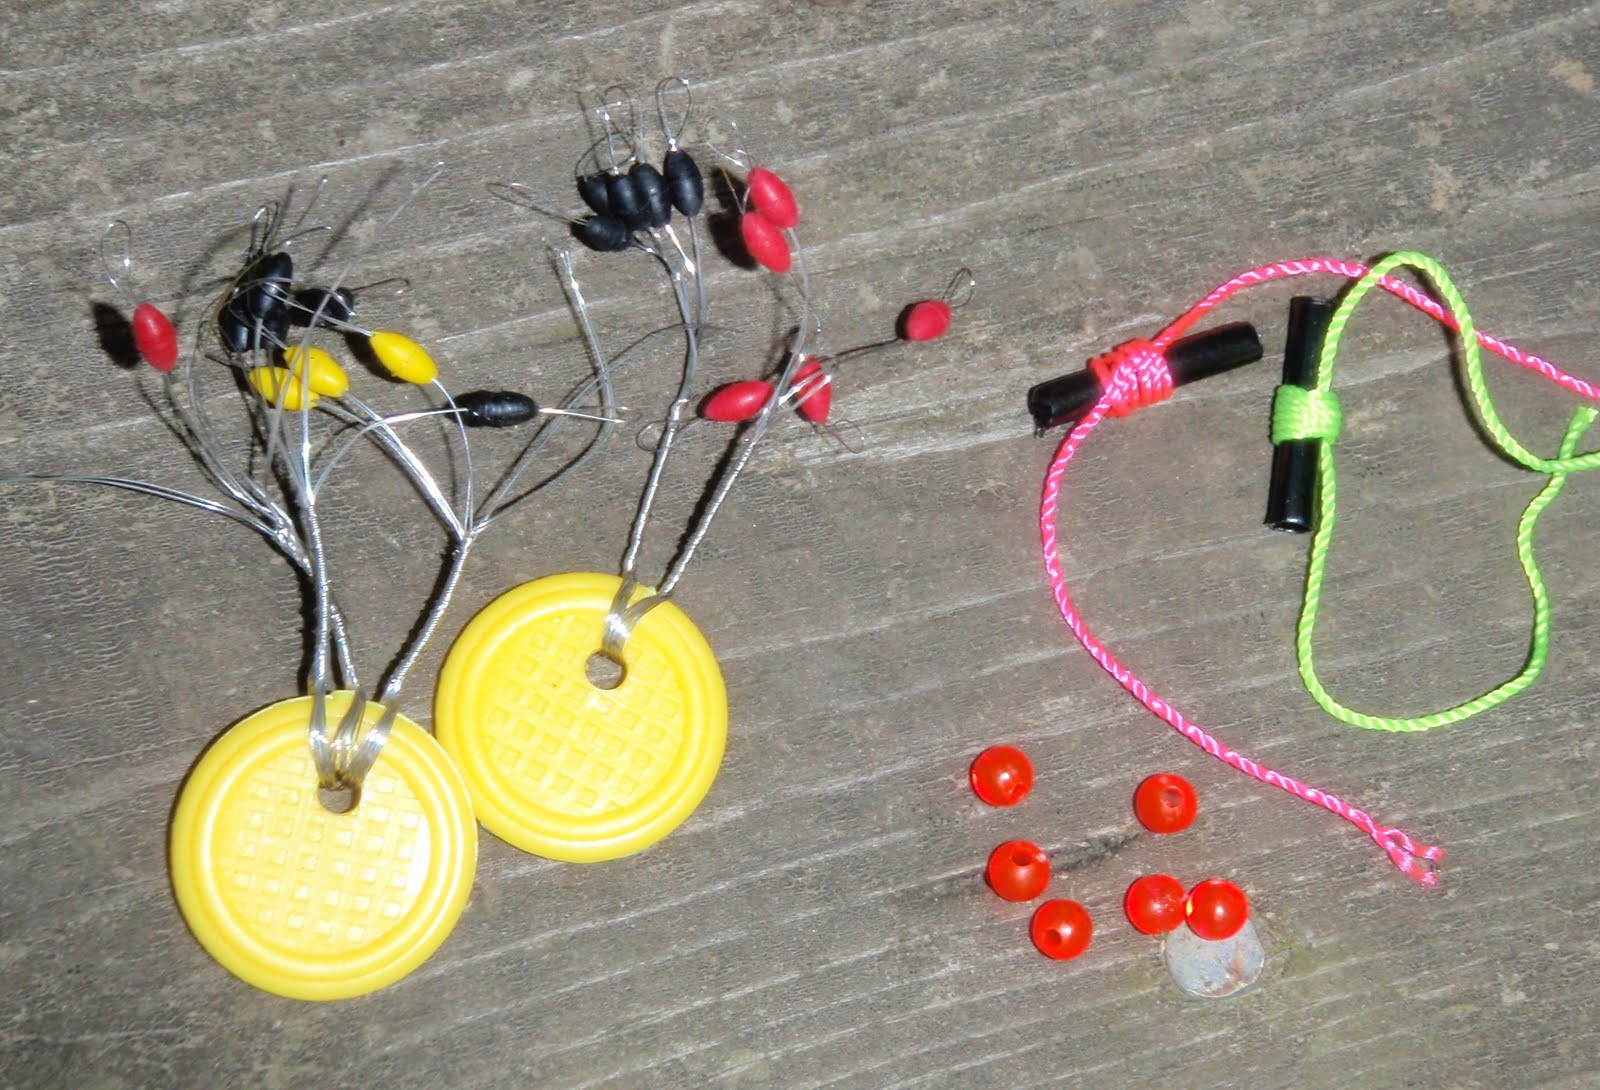 Bass Junkies Fishing Addiction: Slip-bobber Bass'n (and Crappies too!)